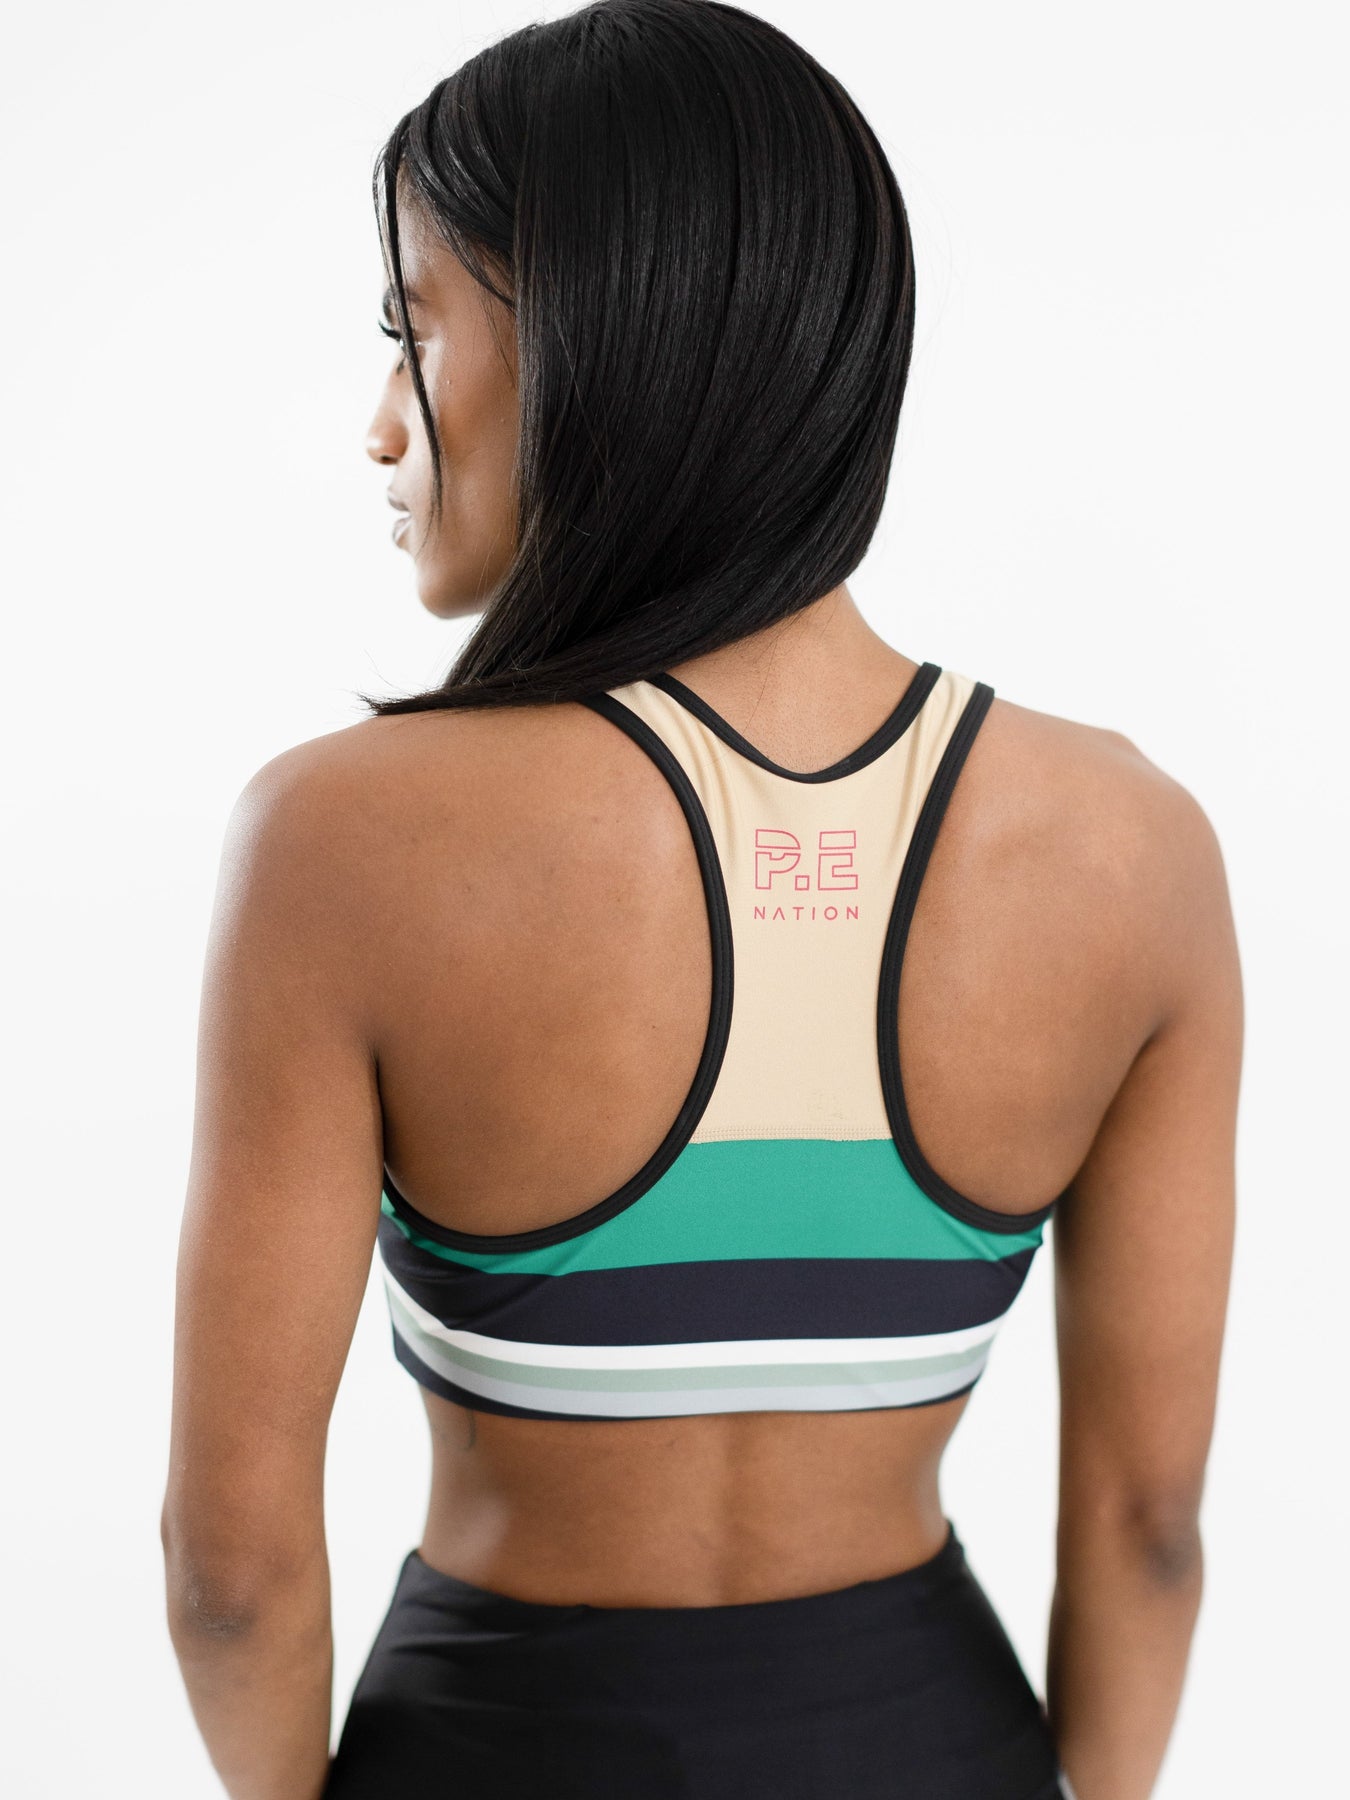 Core Support Sports Bra (Turquoise) by OneMoreRep - Nutrition